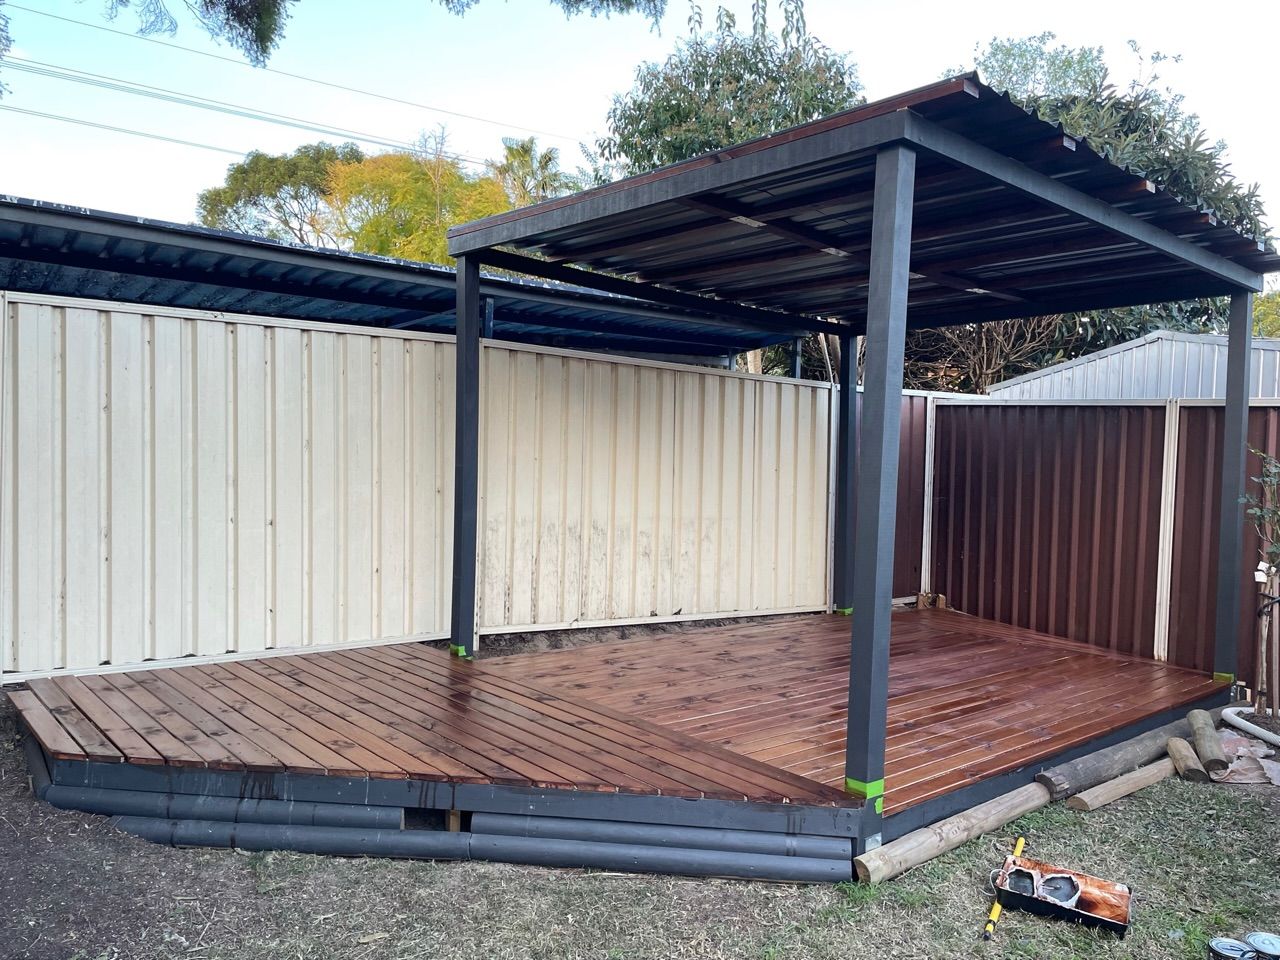 Outdoor Dining and Fire Pit area | Bunnings Workshop community